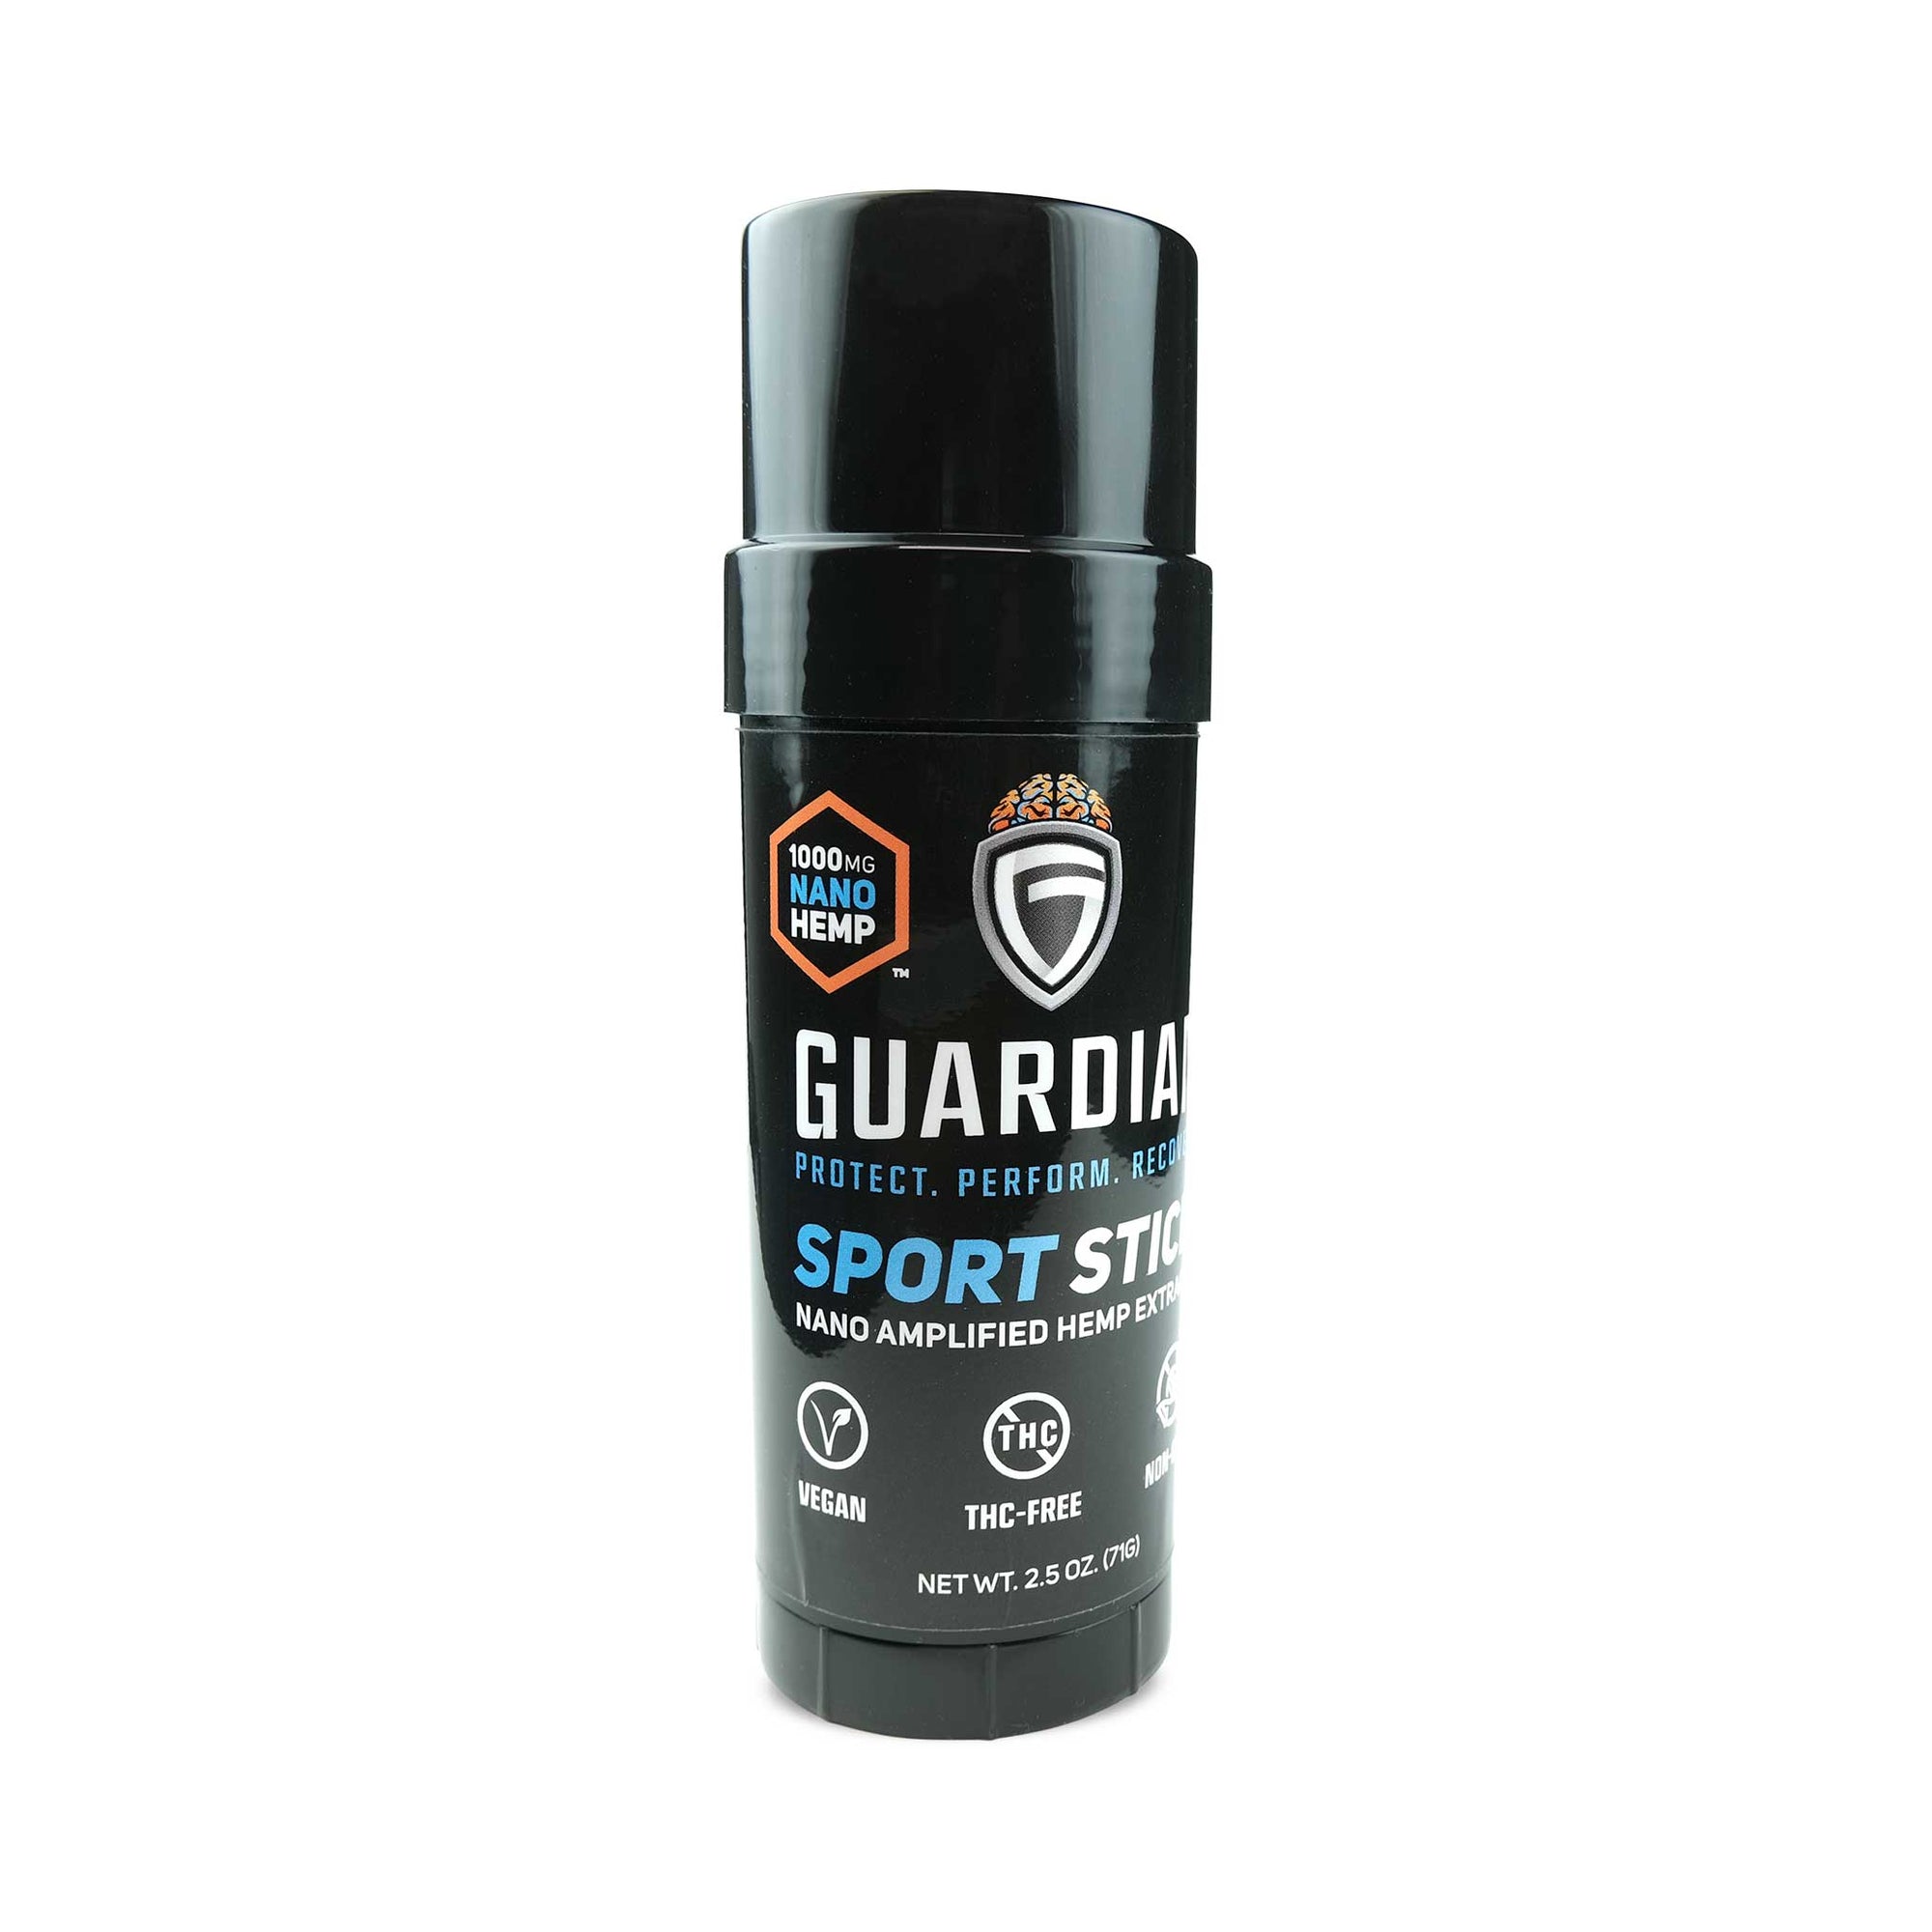 Guardian Athletic sport stick rub-on topical relief